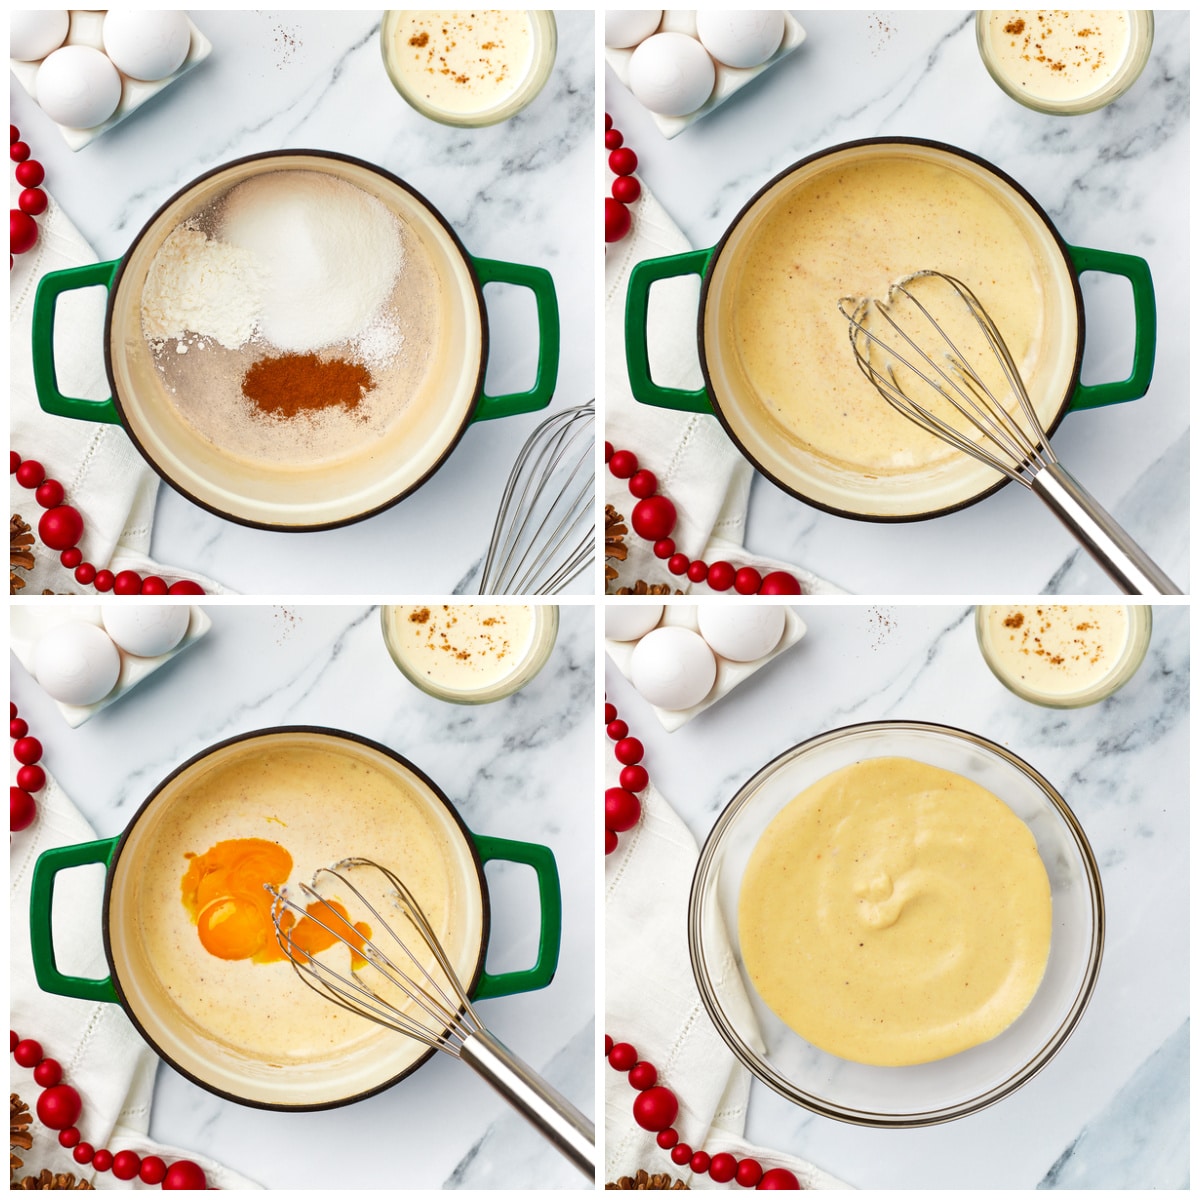 Step by step photos on how to make eggnog pudding for cupcakes.